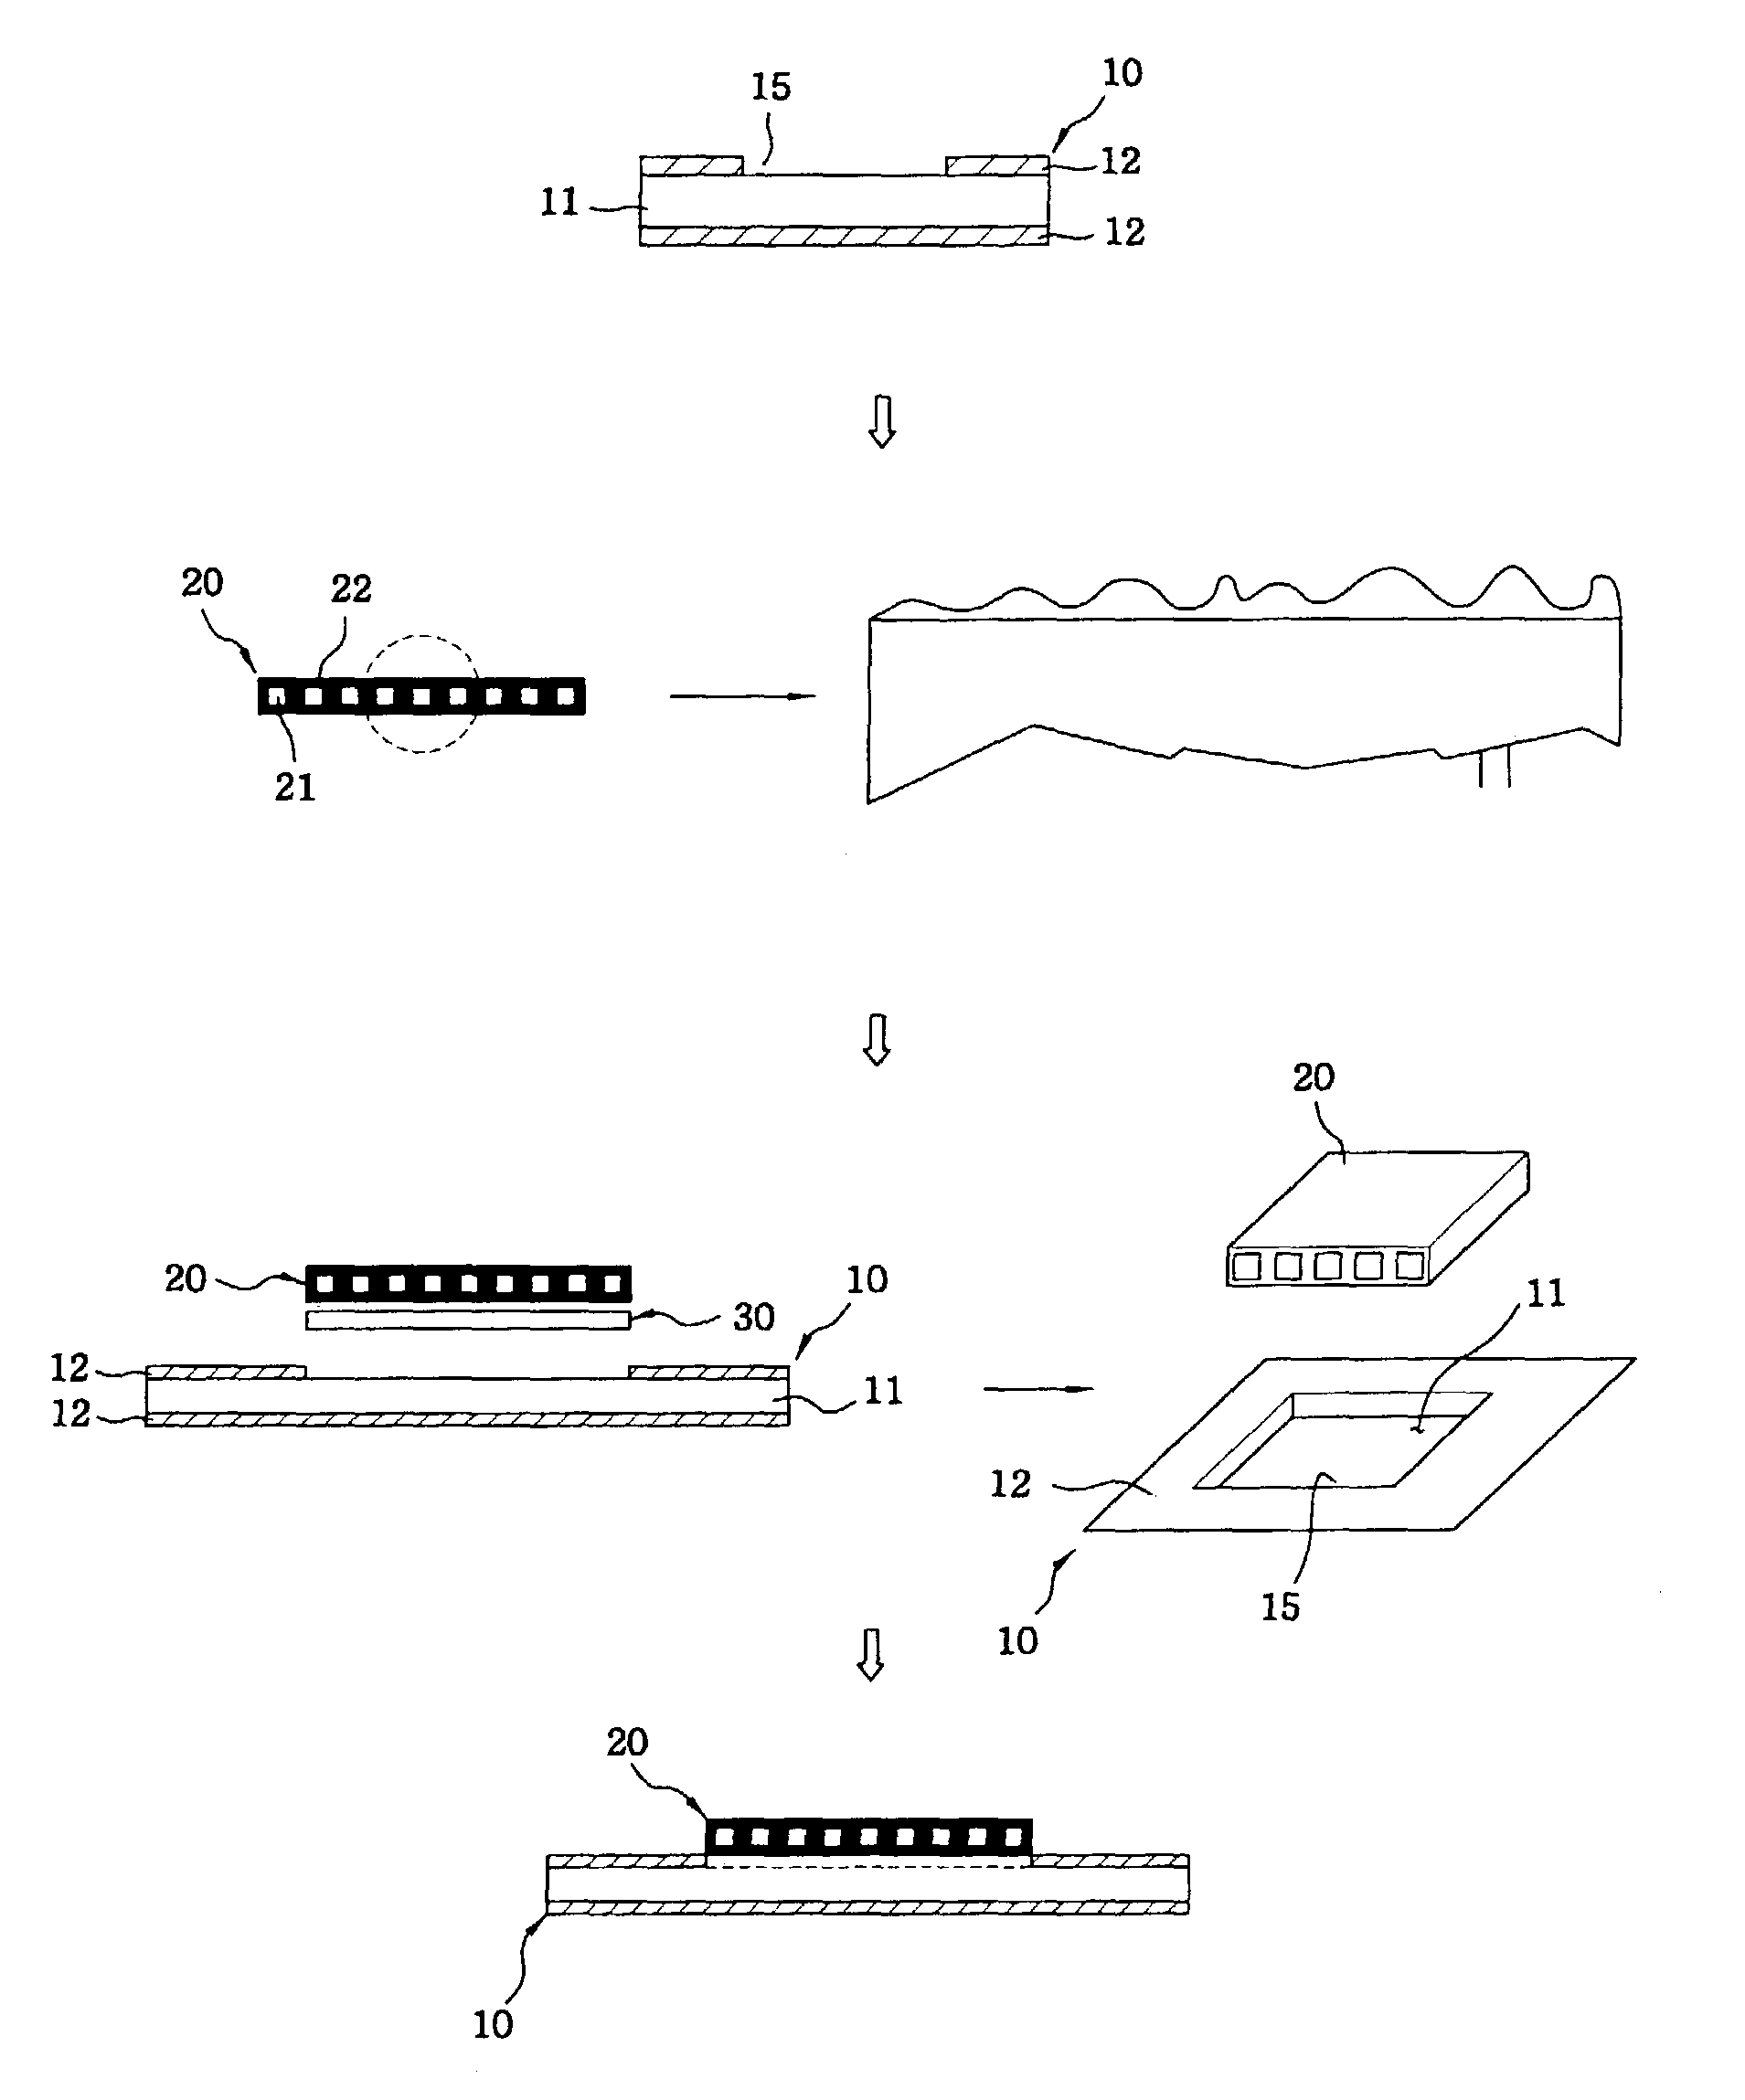 Method of attaching optical waveguide component to printed circuit board